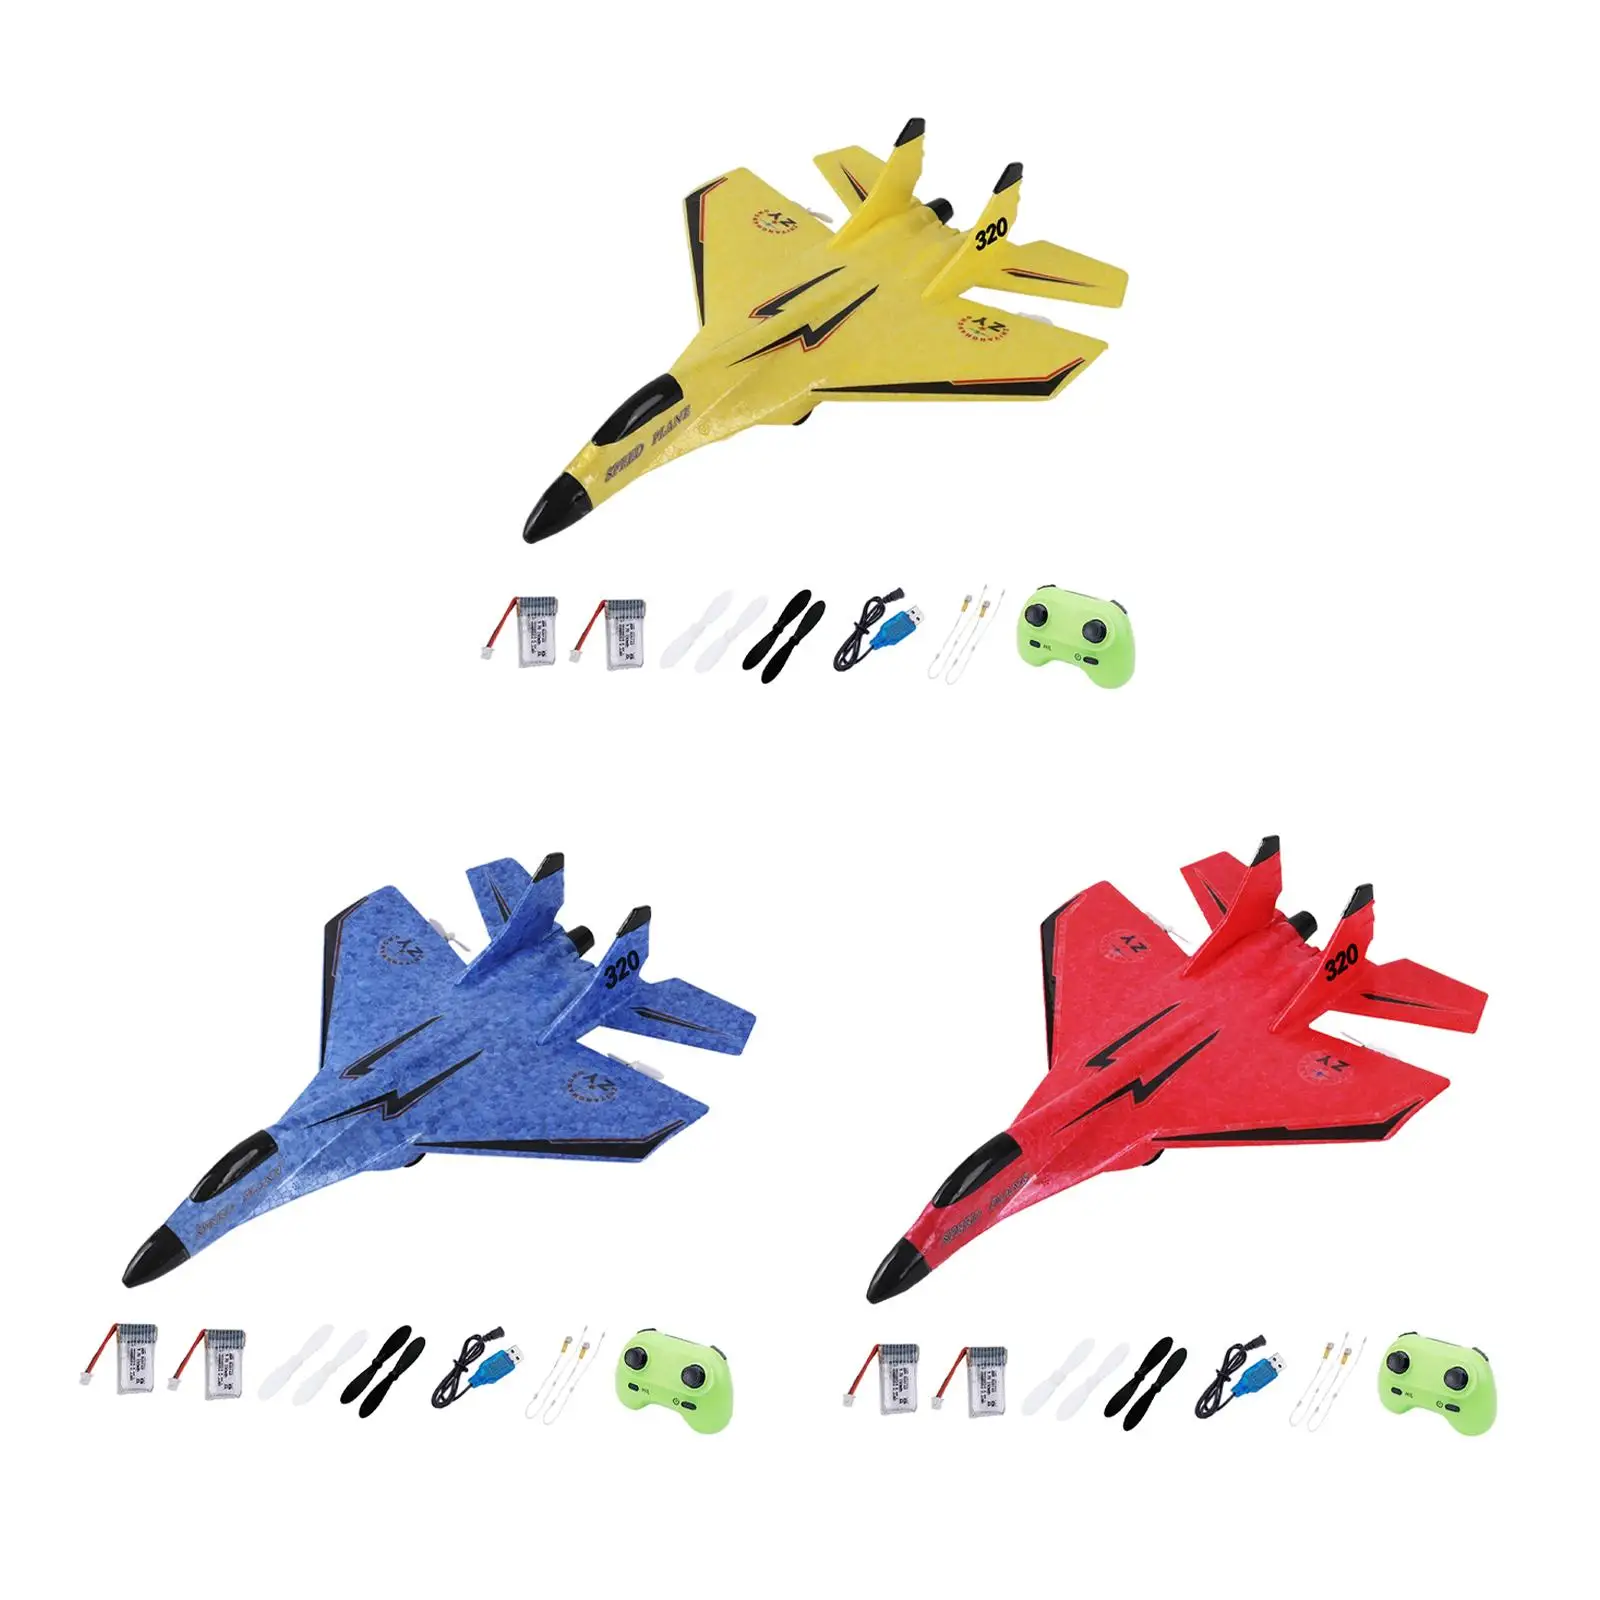 RC Remote Control Plane 2.4G 2 Channels Radio Controlled Ready to Fly Toys EPP Aircraft for Kids & Adults 150M Distance